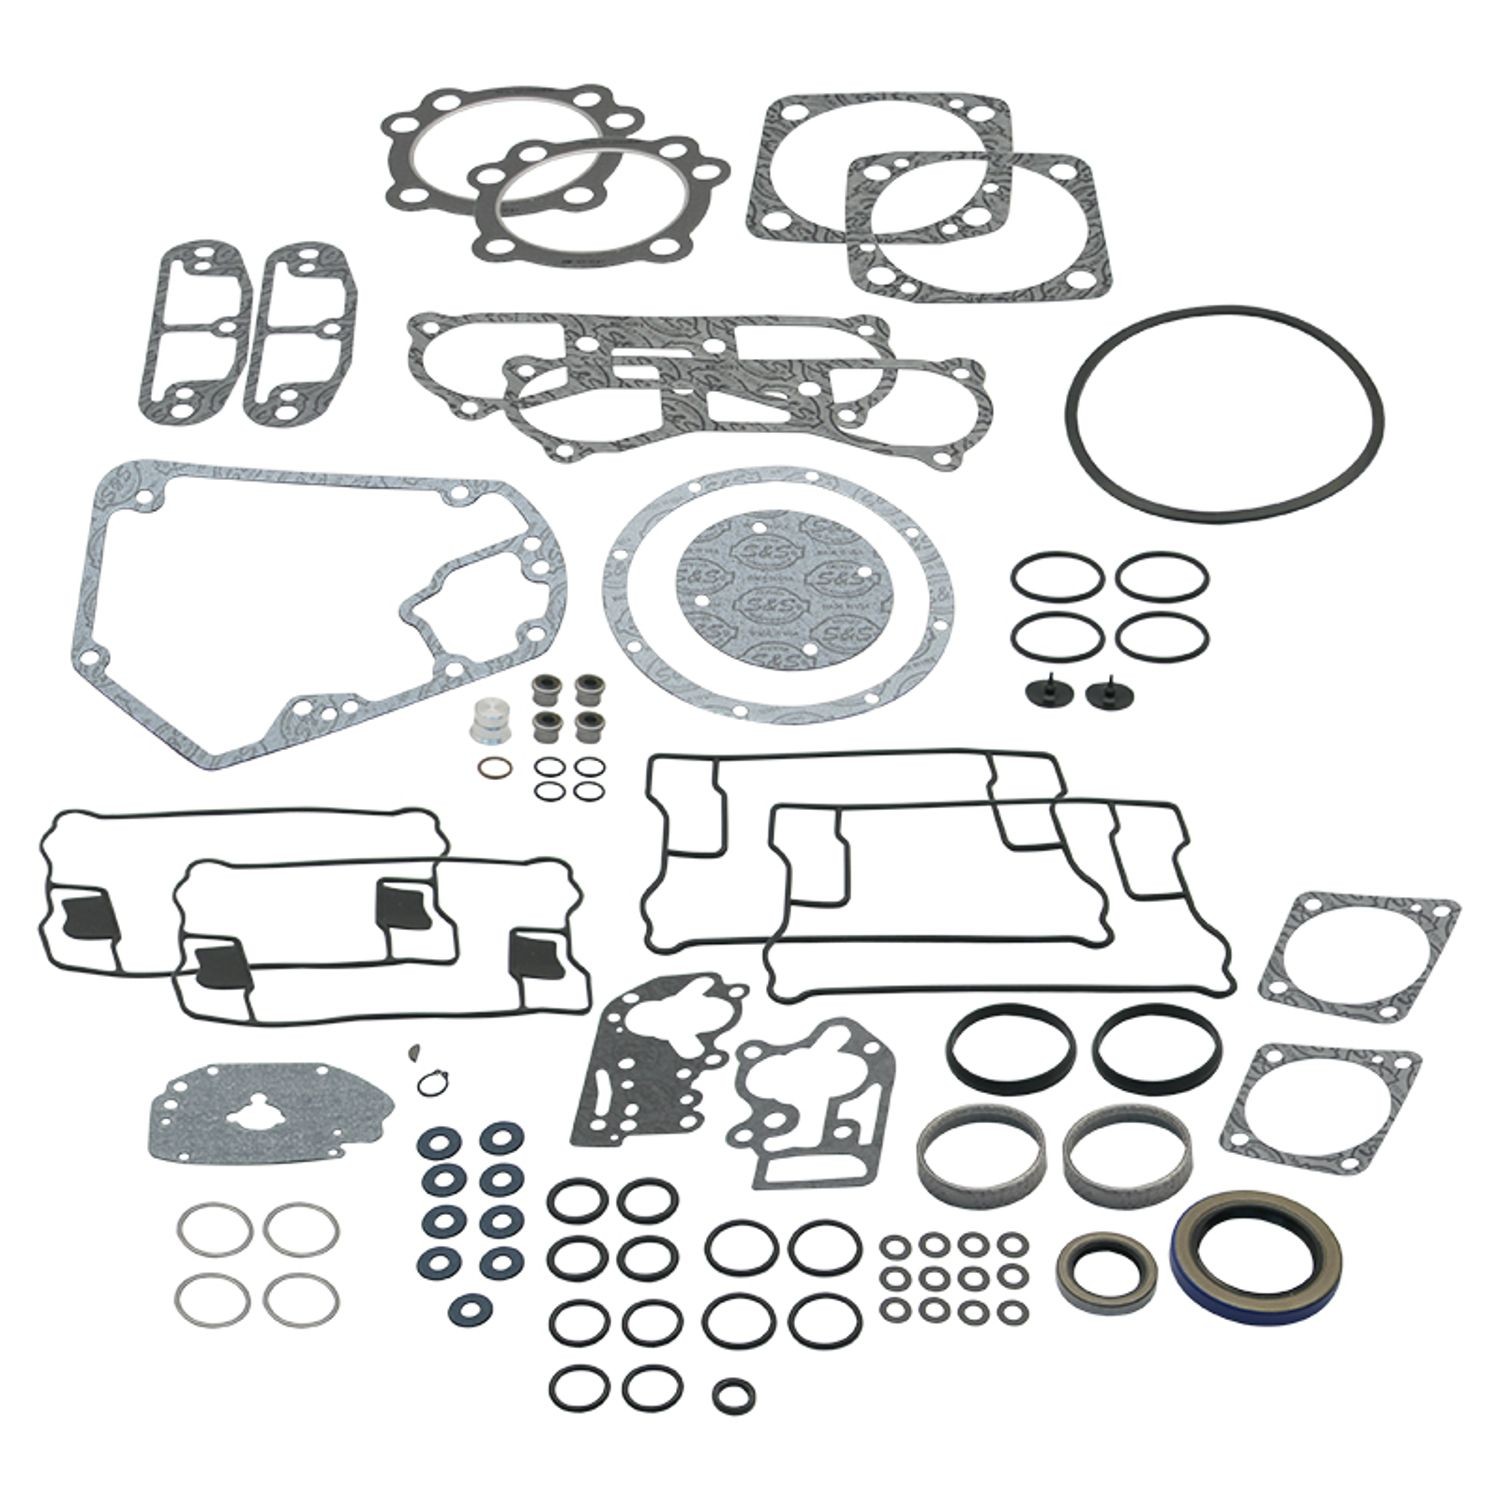 v-serie-3-625-bore-engine-gasket-kit-downtown-american-motorcycles